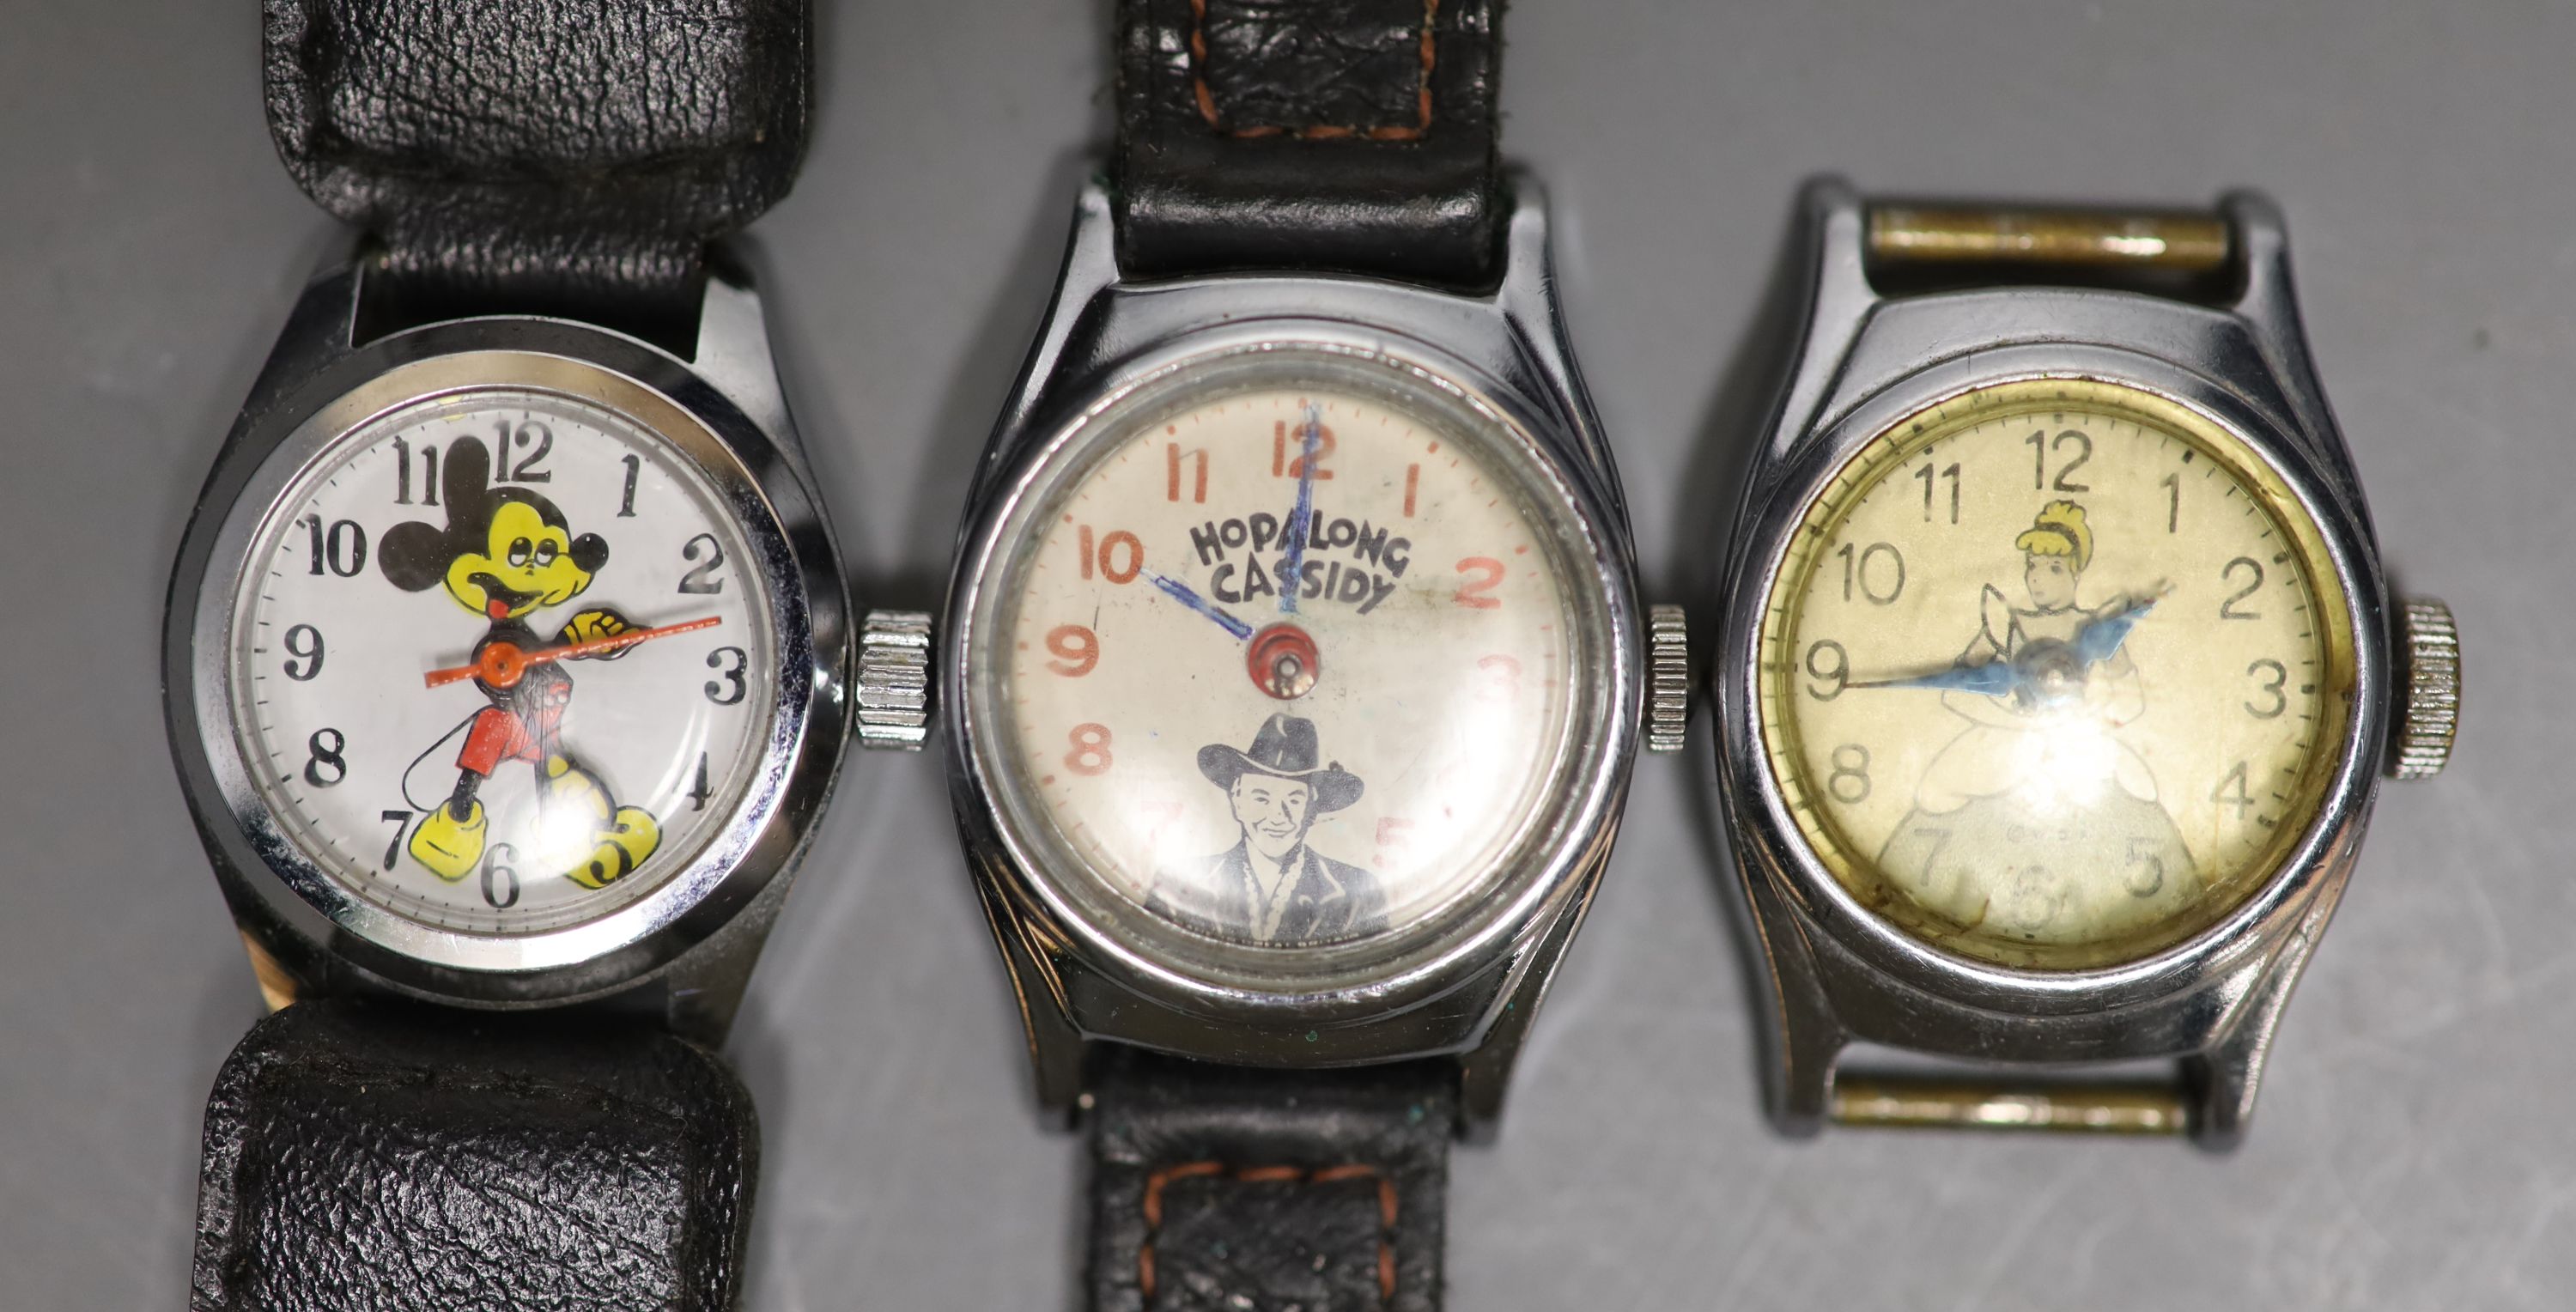 Three assorted small size steel wrist watches, including Mickey Mouse, Hopalong Cassidy and Cinderella.